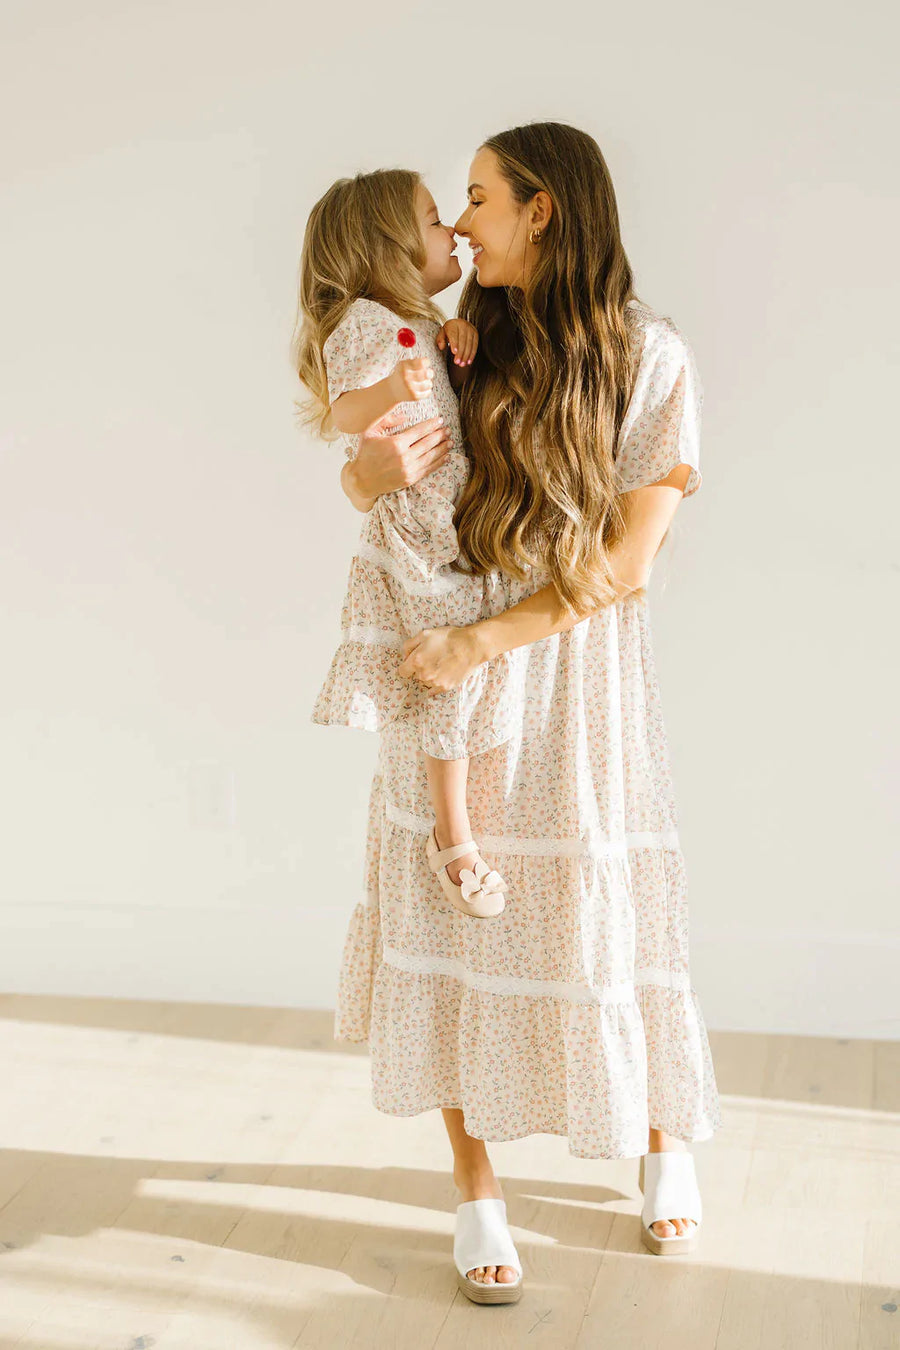 Mommy and me floral dress